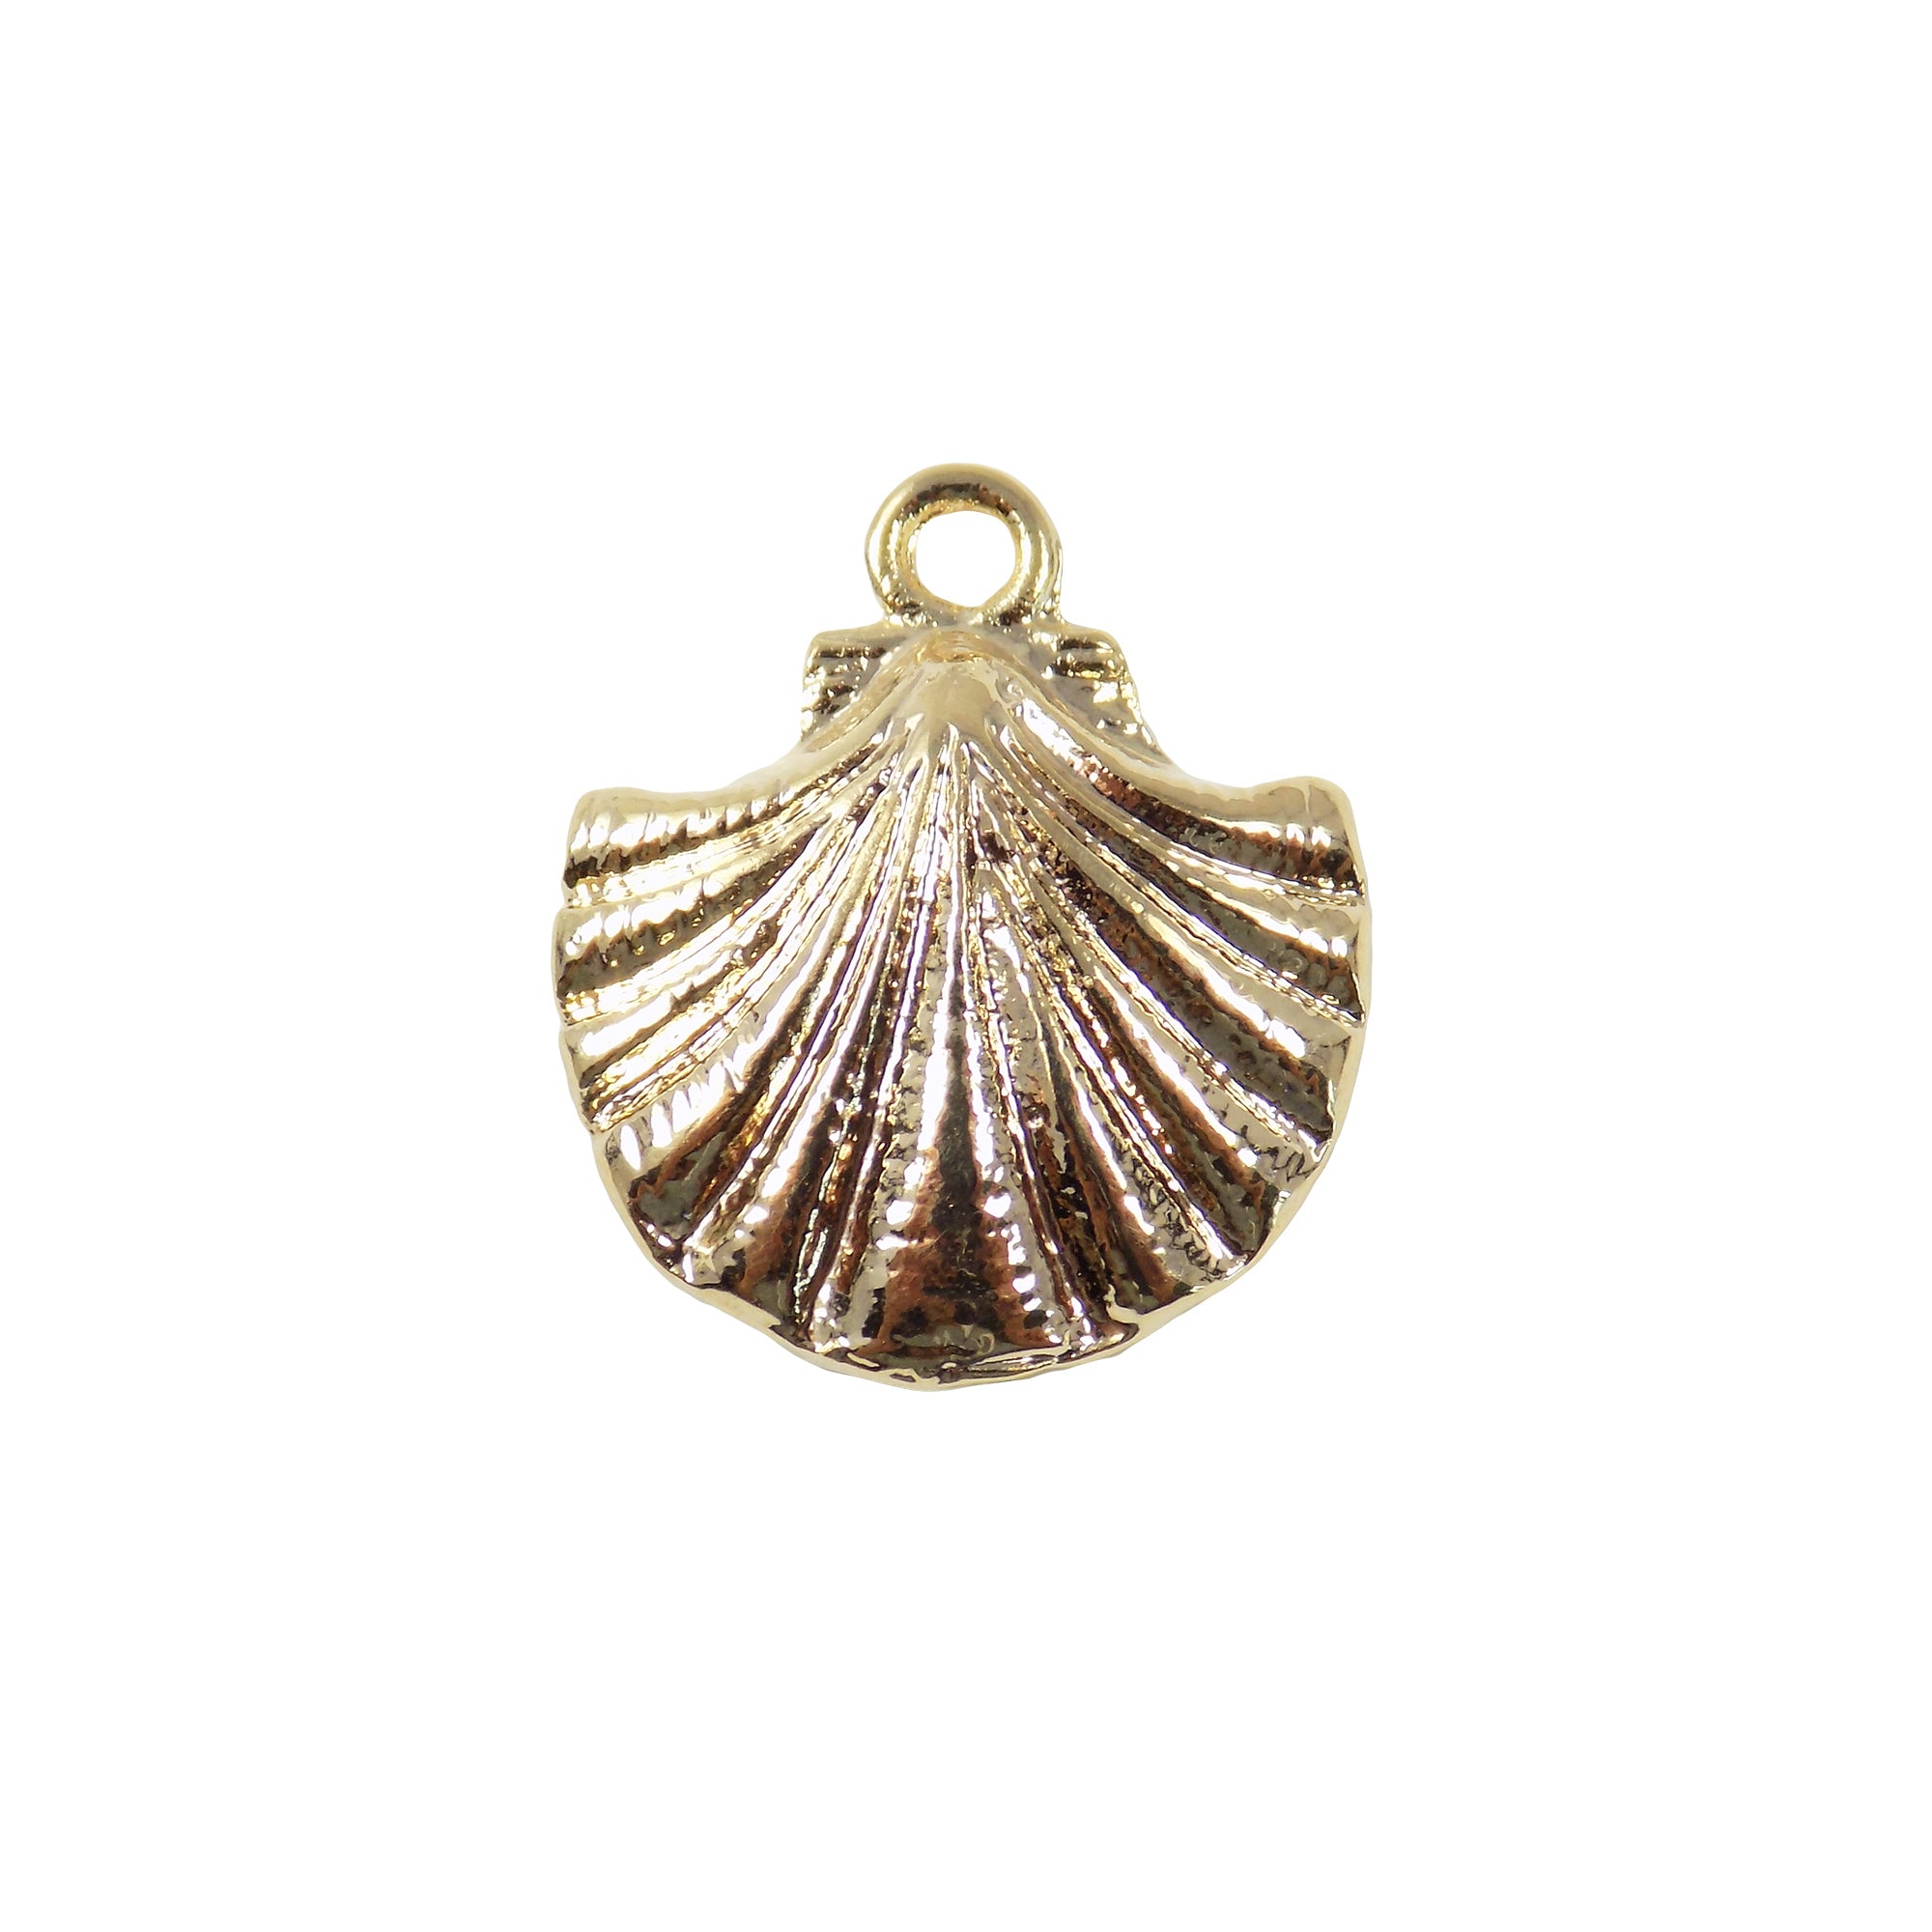 Scallop Charm, Oyster Pendant, Gold Plated 18K, Sea Shell Pendant, Tiny Shell Charm, Summer Charm Sea Pendant Wholesale